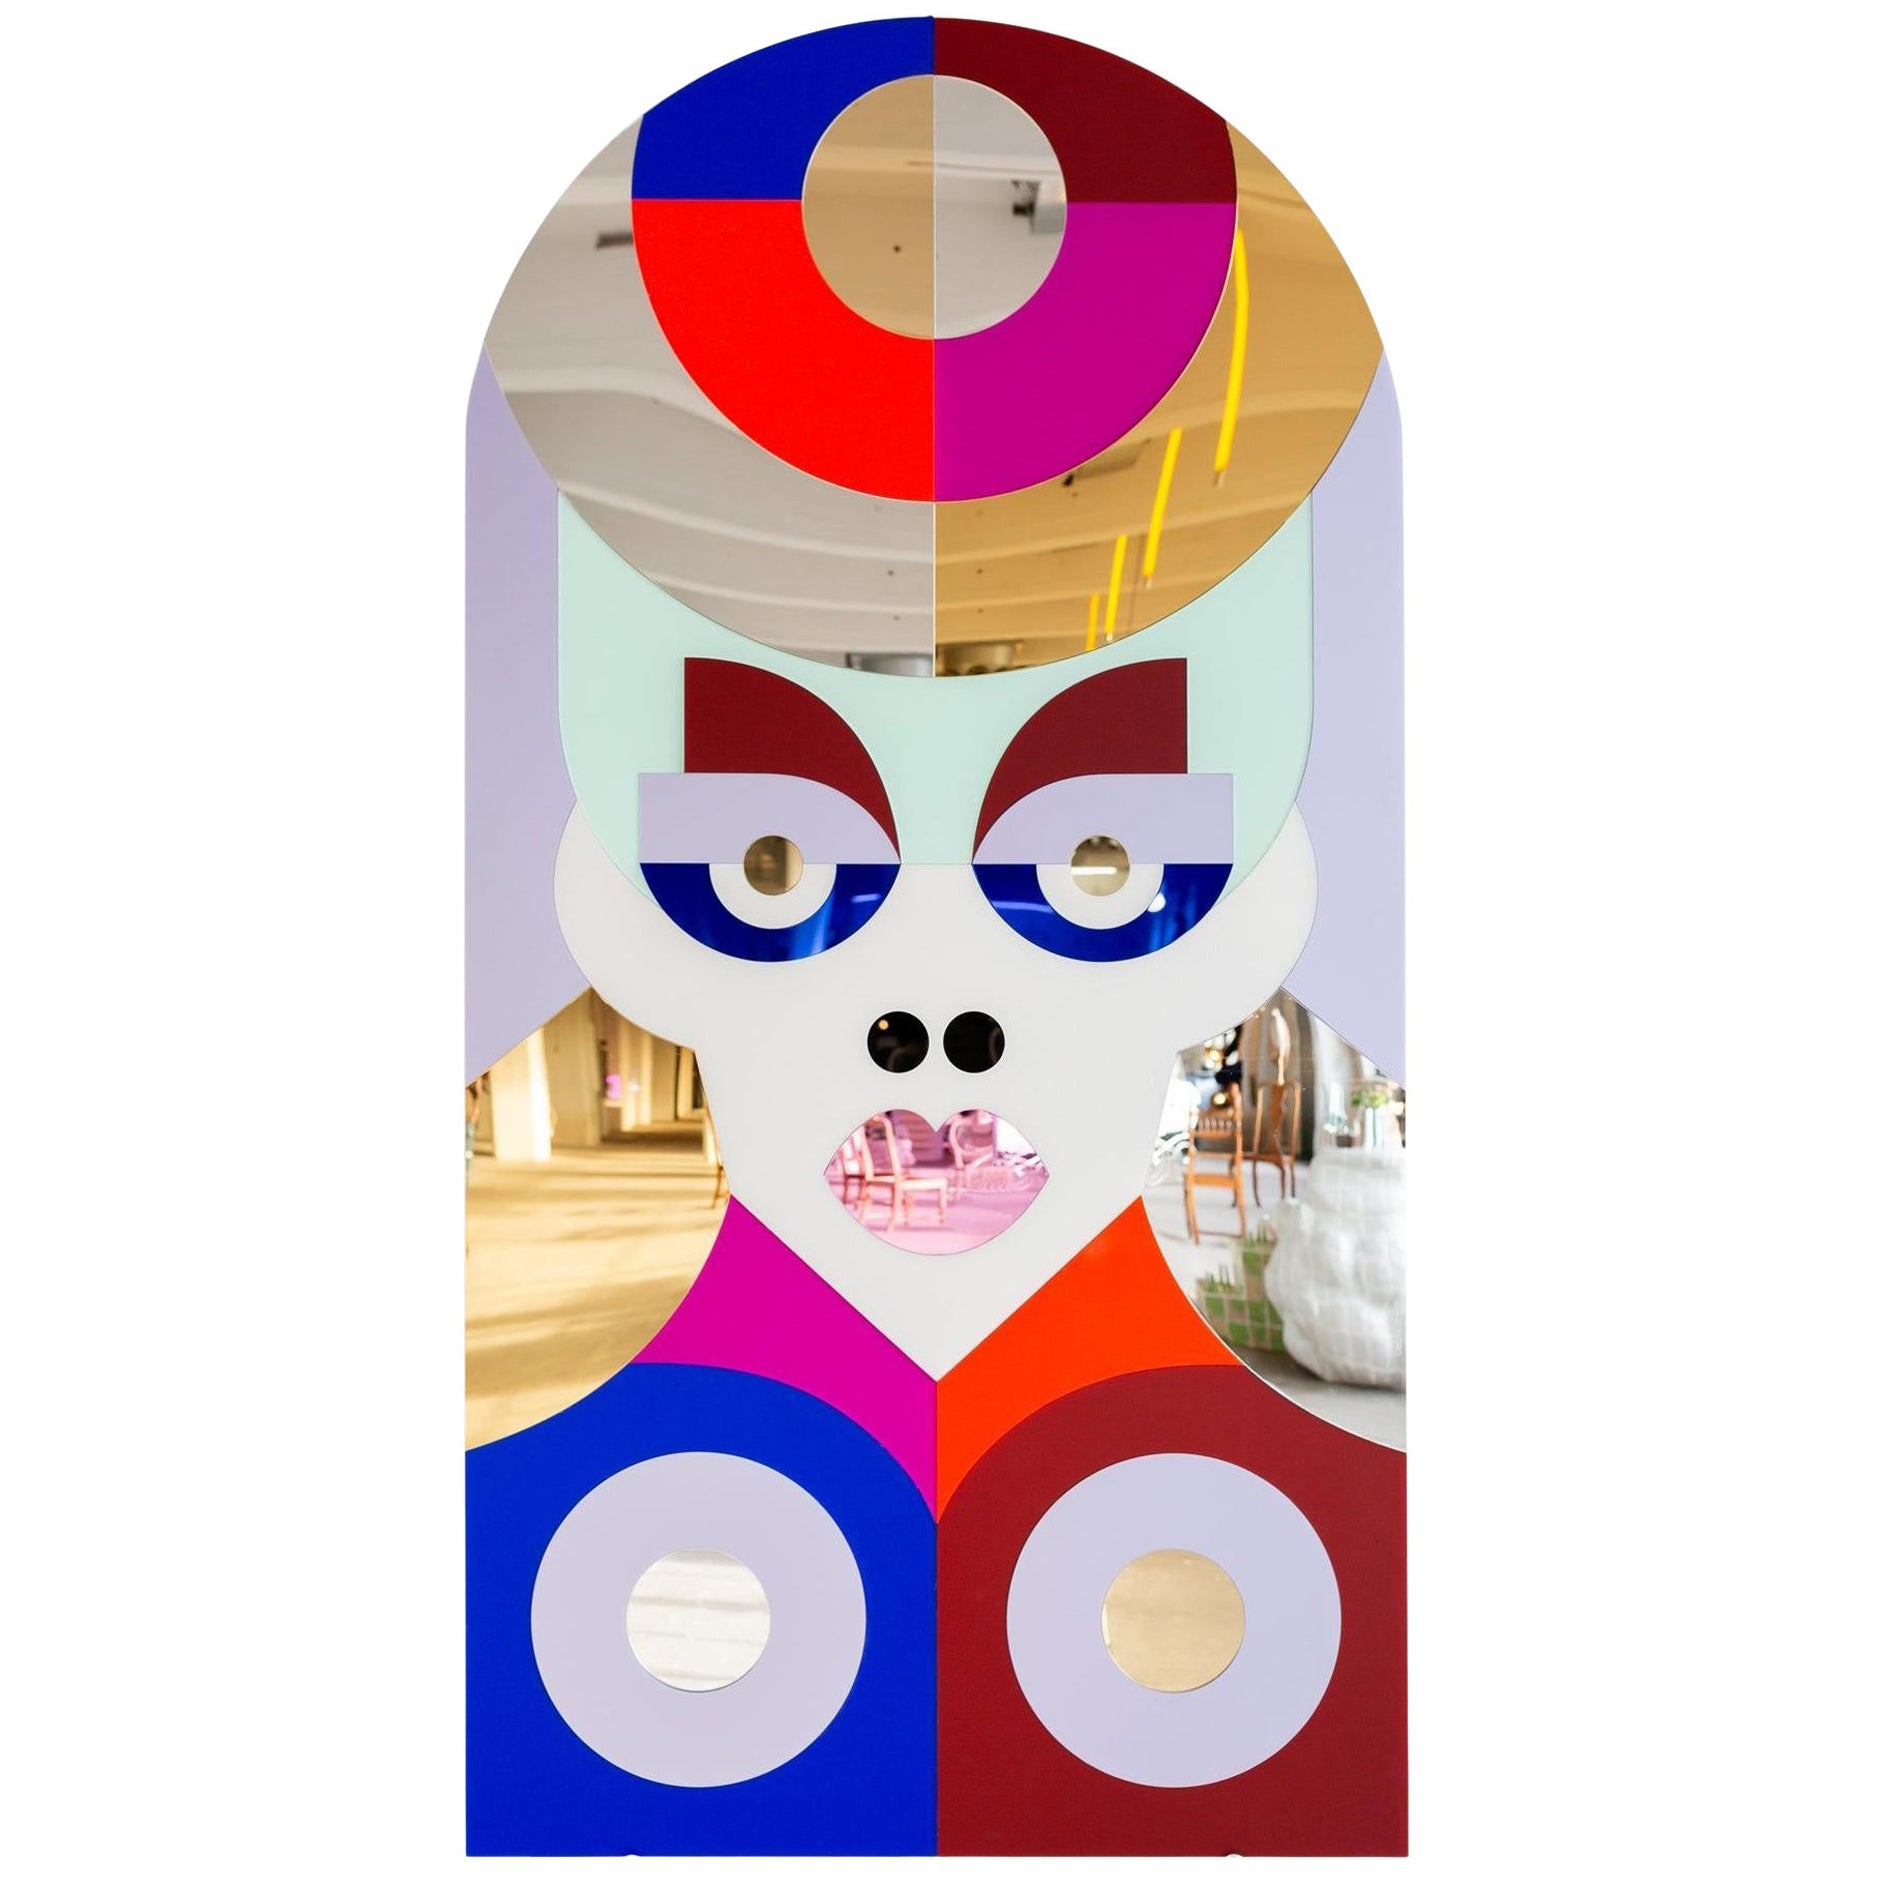 Karma, large colorful mirror artwork made of plexiglass For Sale